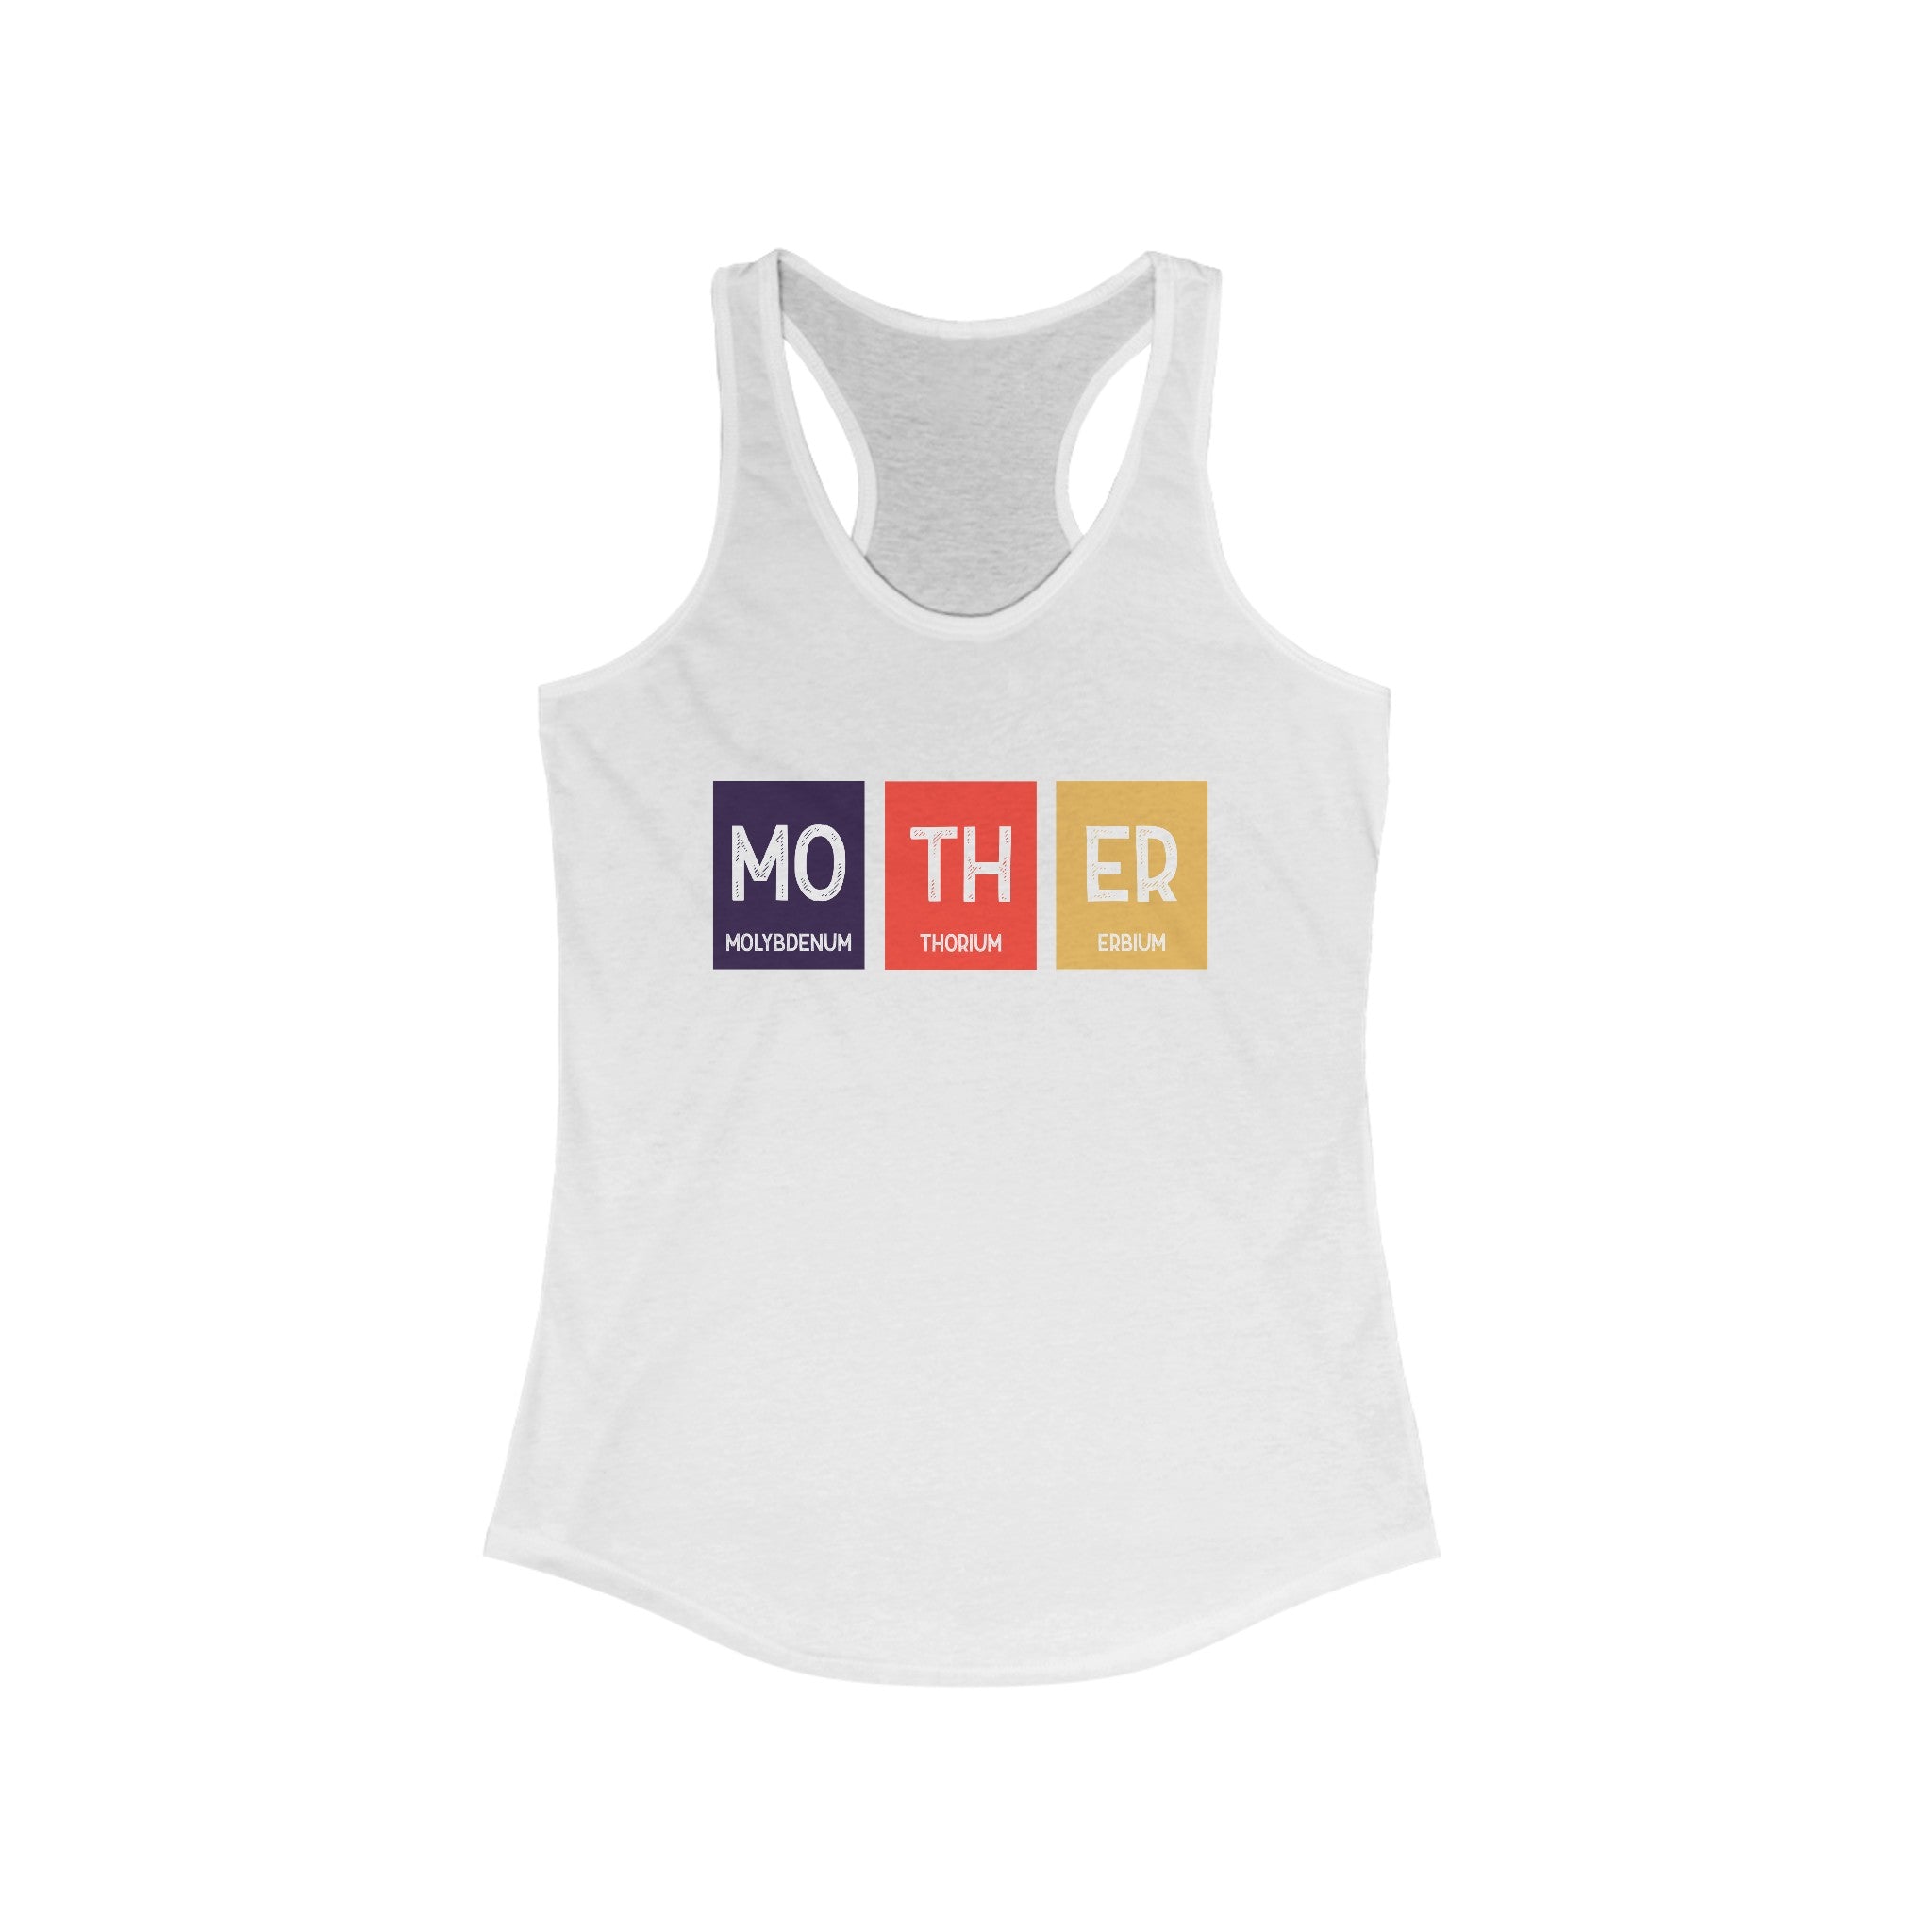 Mo-TH-ER - Women's Racerback Tank with a design that spells "MOTHER" using elements from the periodic table: Molybdenum (Mo), Thorium (Th), and Erbium (Er). Perfect as a workout choice or casual wear.